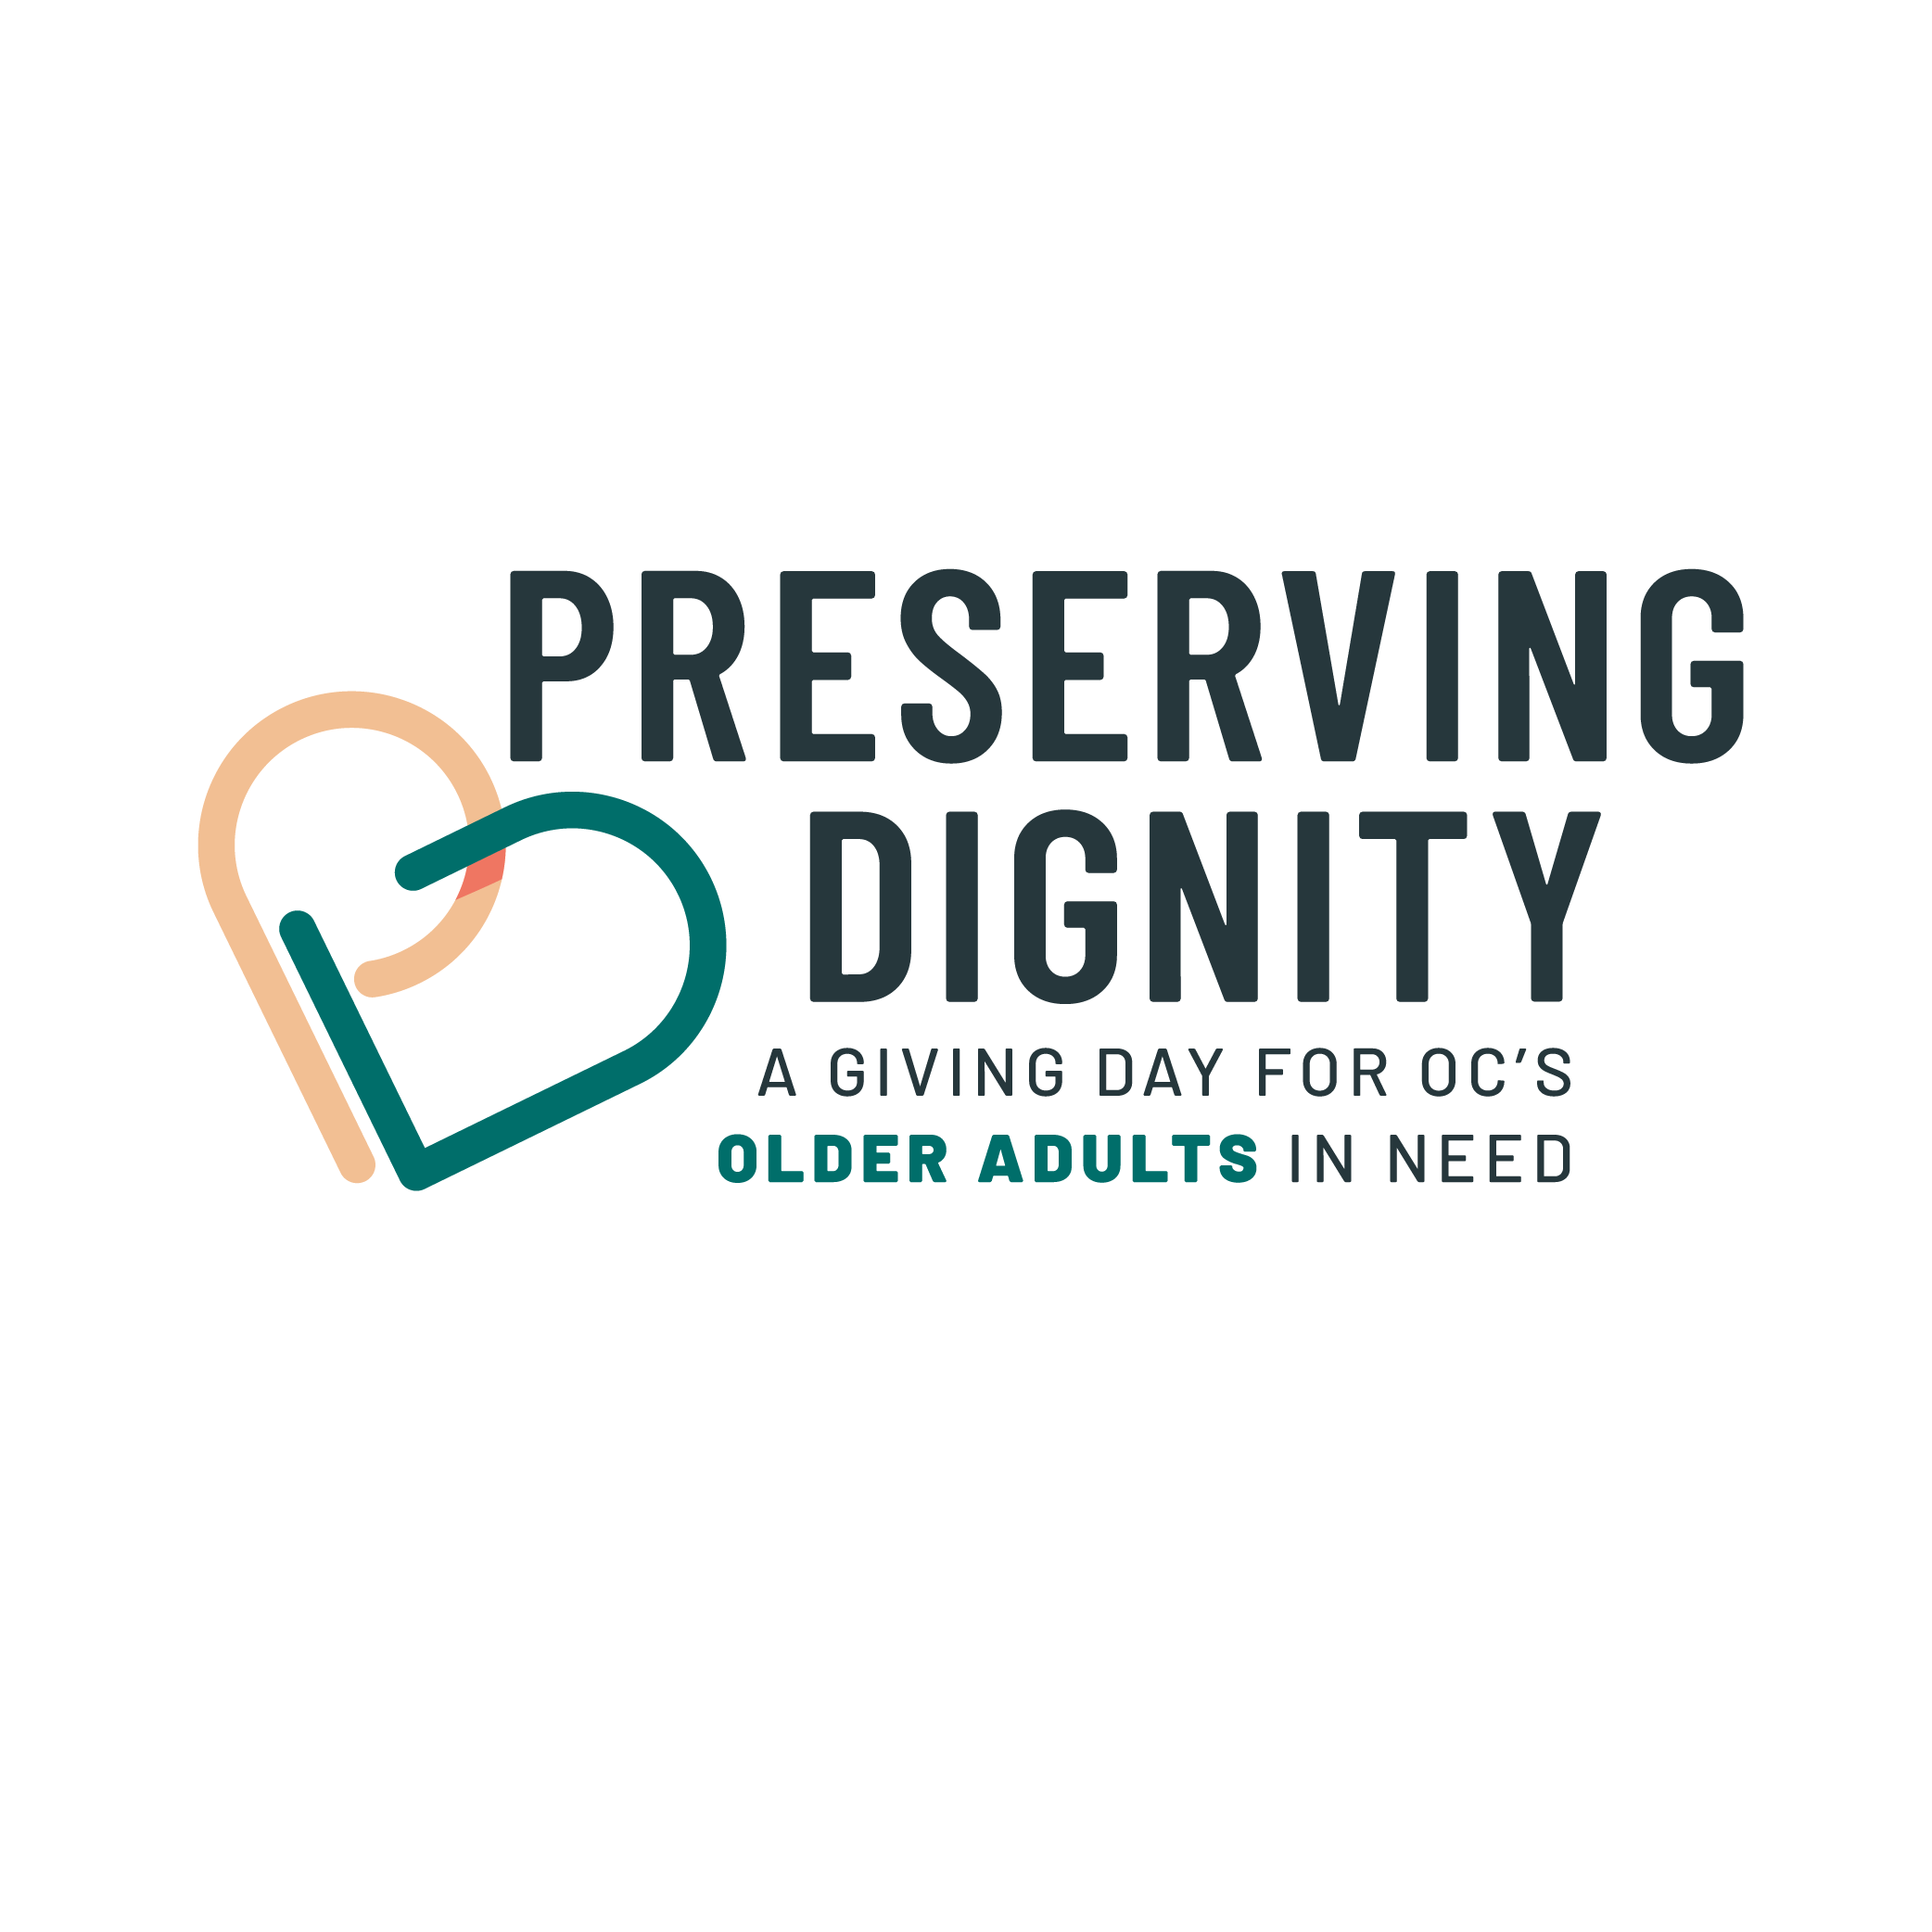 OCCF Insider: Give Today to Preserving Dignity!